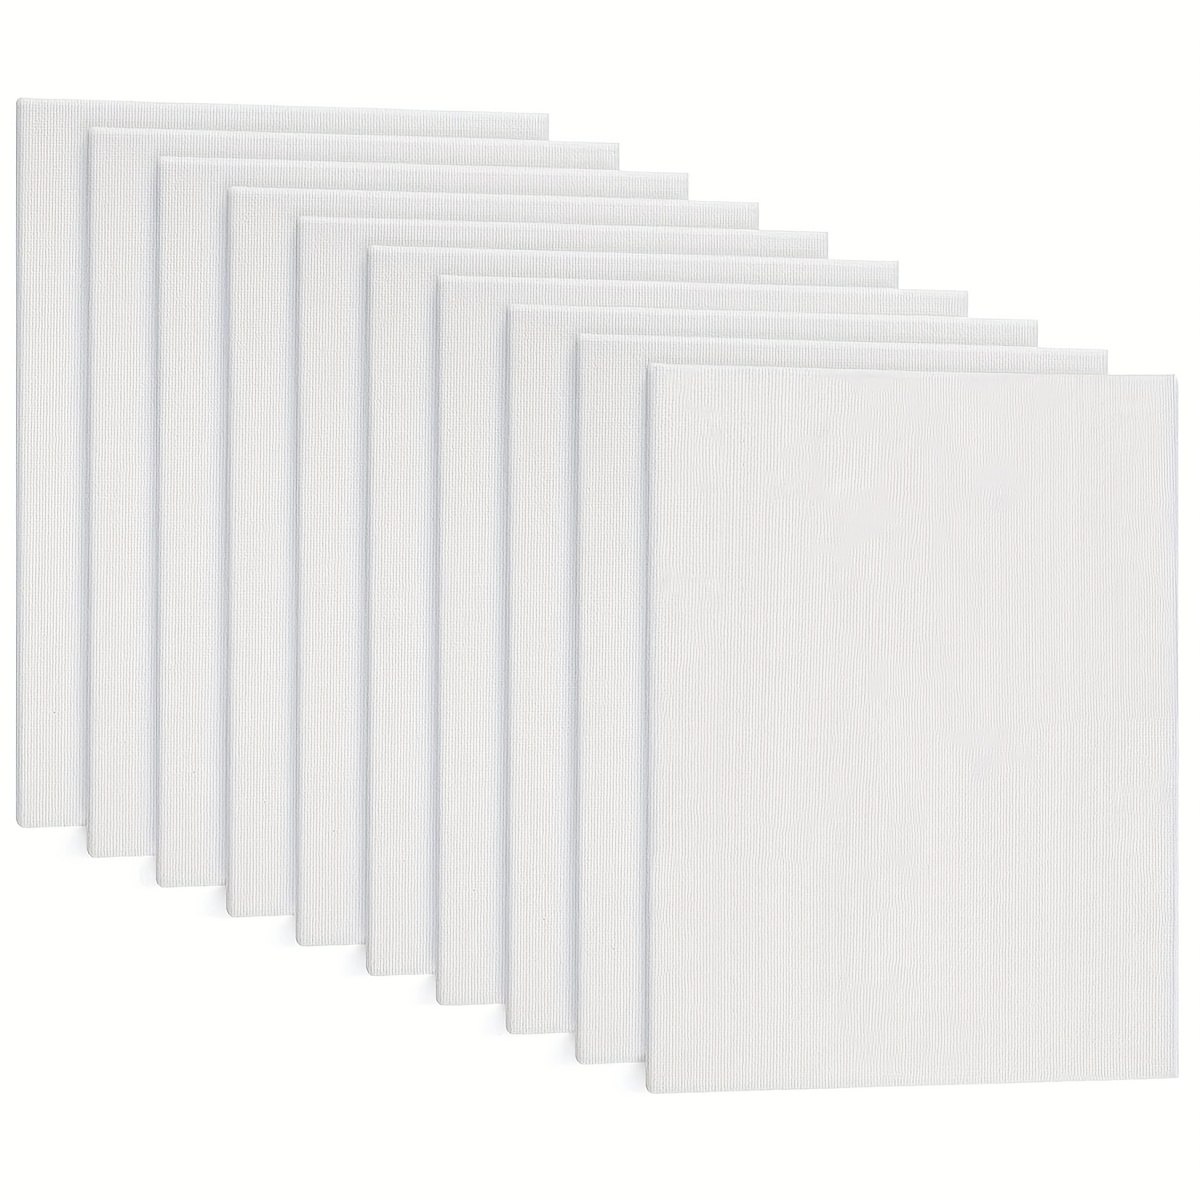 Tohuu Blank Canvas 2pcs Art Canvases for Painting Cotton Paint Canvases for Painting  Blank Flat Canvas Board for Acrylics Oil Watercolor Tempera Paints sensible  